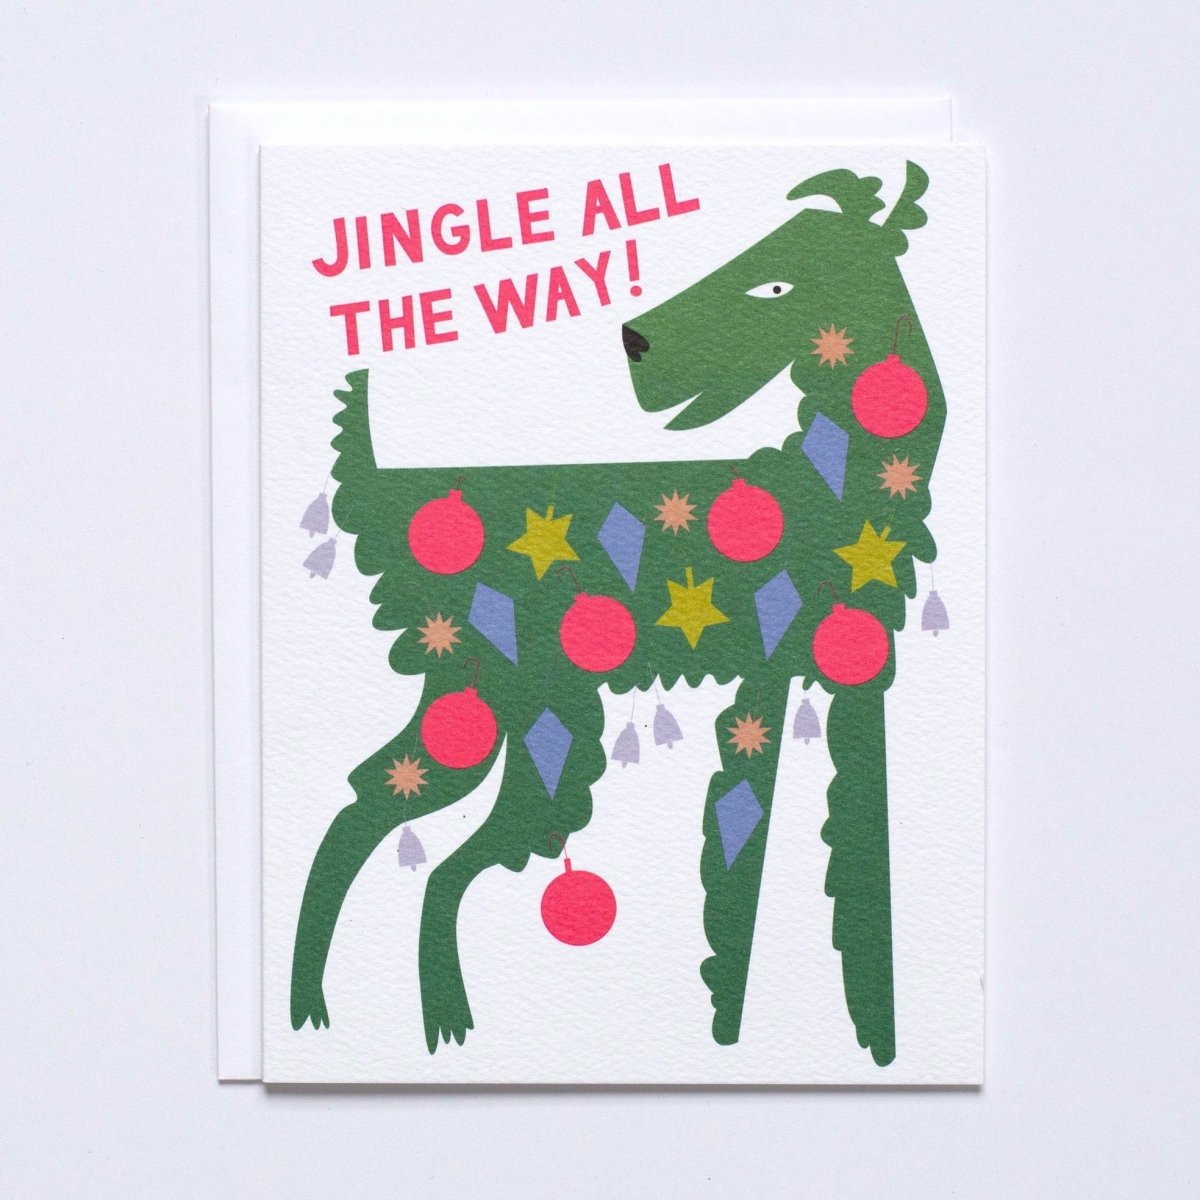 Green dog covered in ornaments in various holiday shapes against a white background. Front of card reads: "JINGLE ALL THE WAY!" Made with recycled paper by Banquet Atelier in Vancouver, British Columbia, Canada.